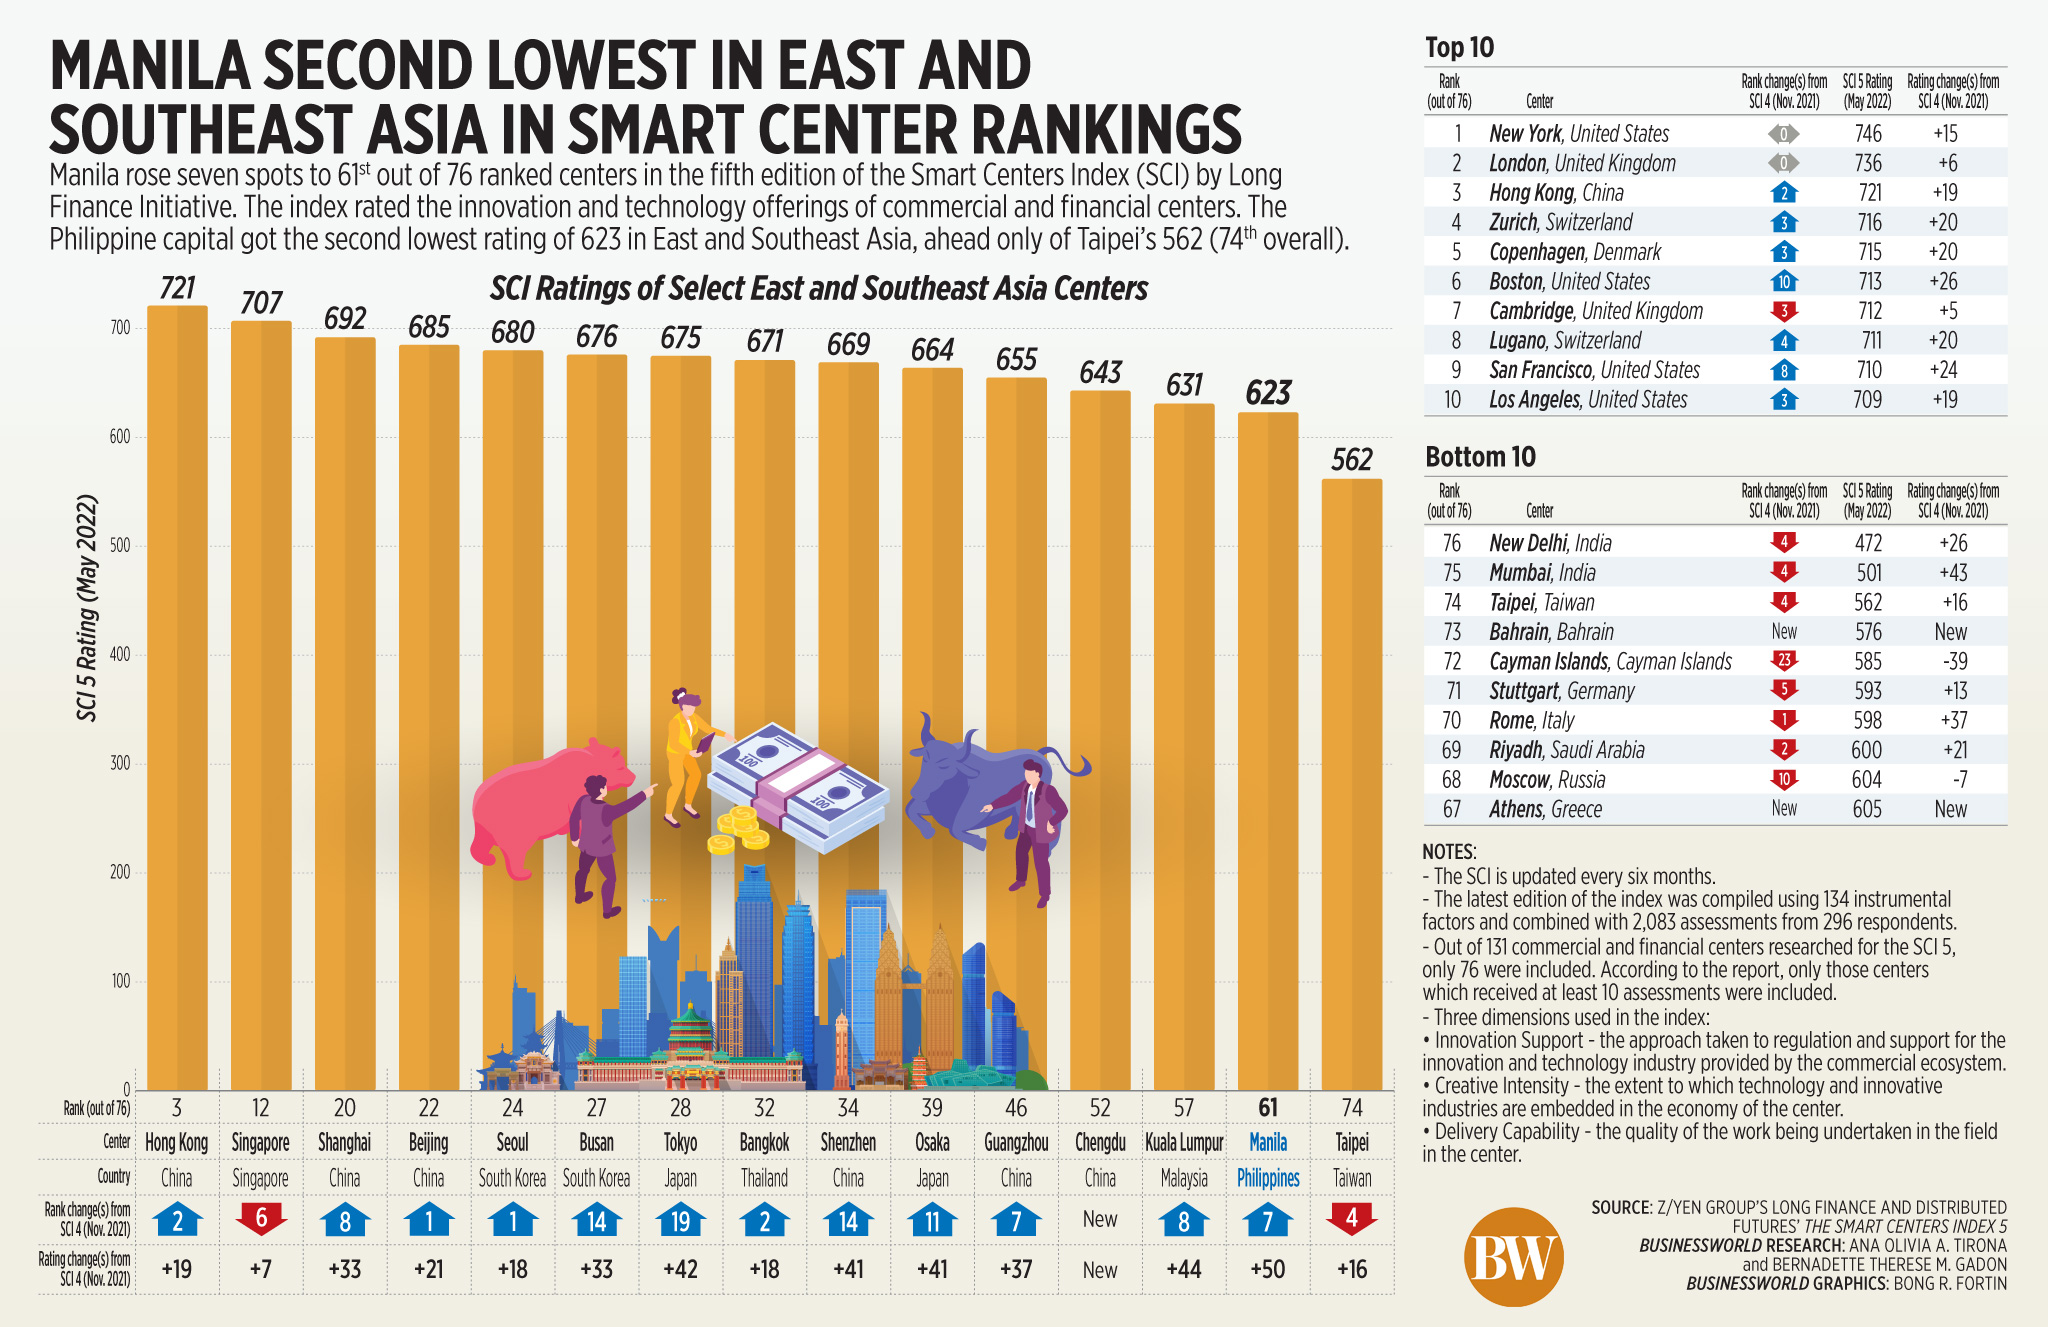 Manila second lowest in east and southeast Asia in smart center rankings